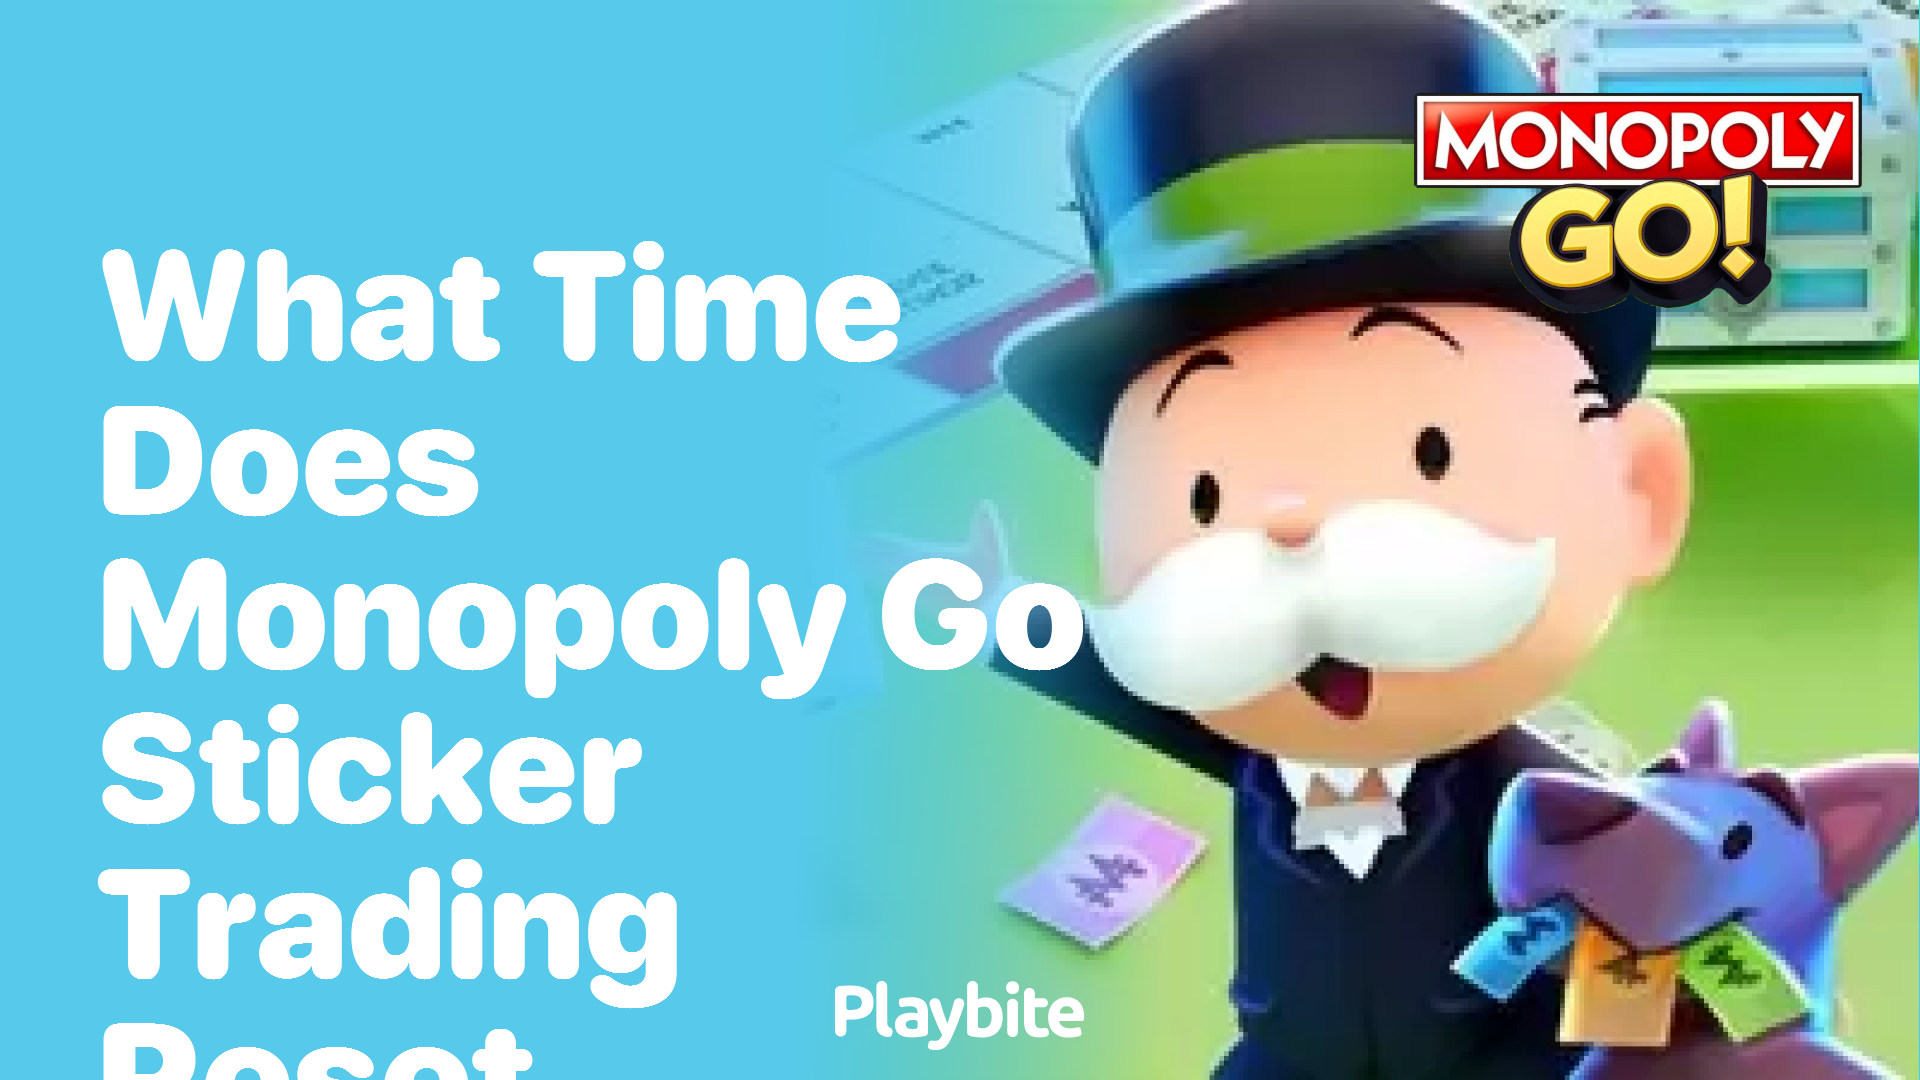 What Time Does Monopoly Go Sticker Trading Reset?